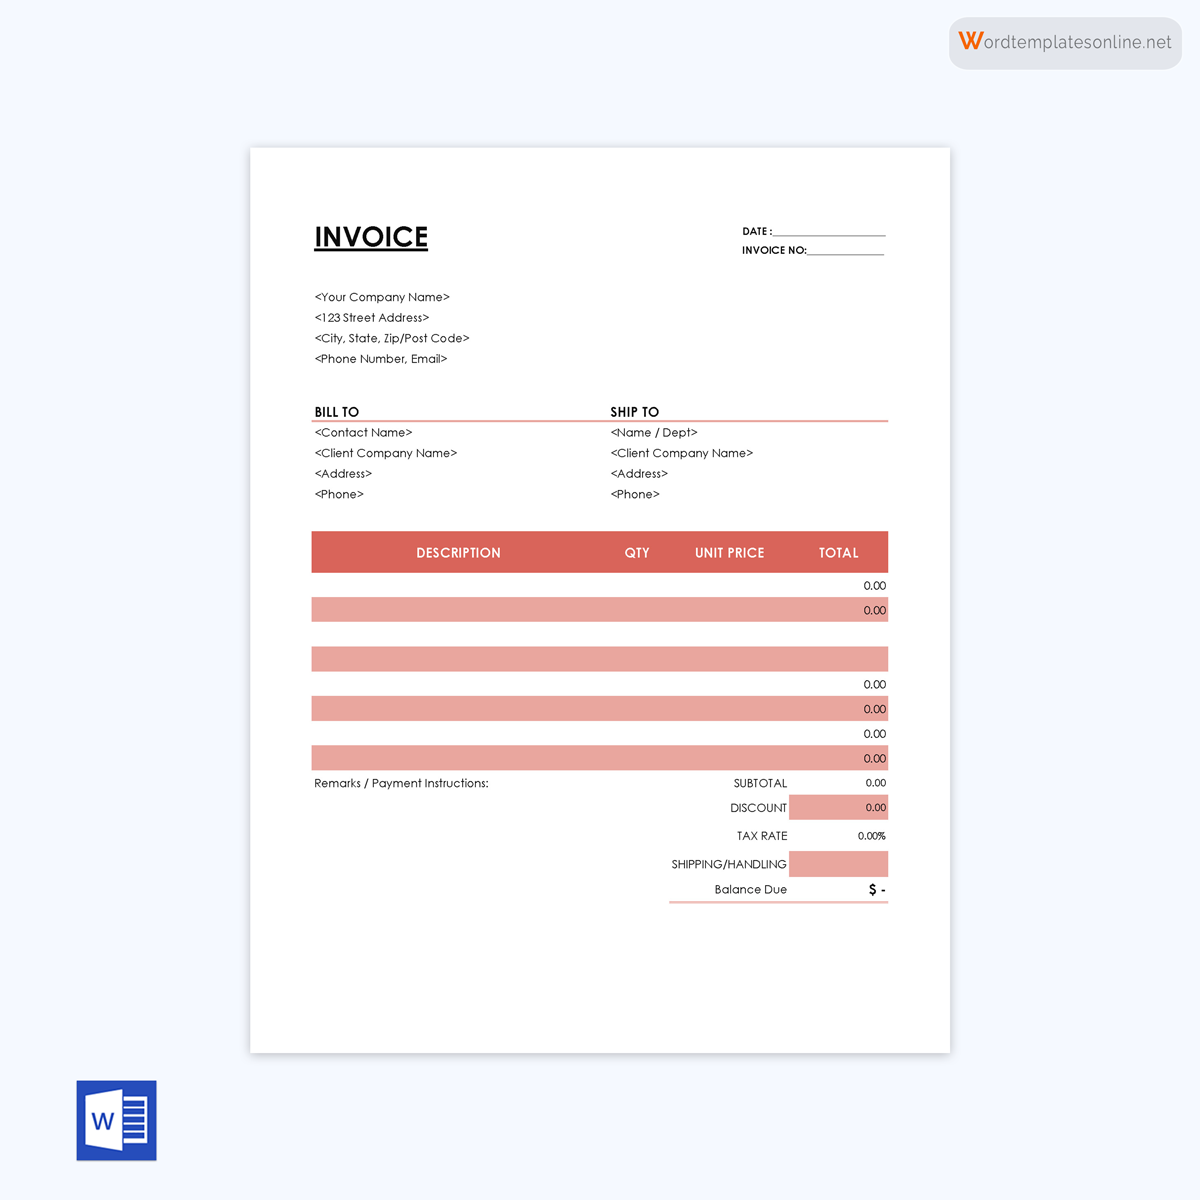 Word invoice template example - free download